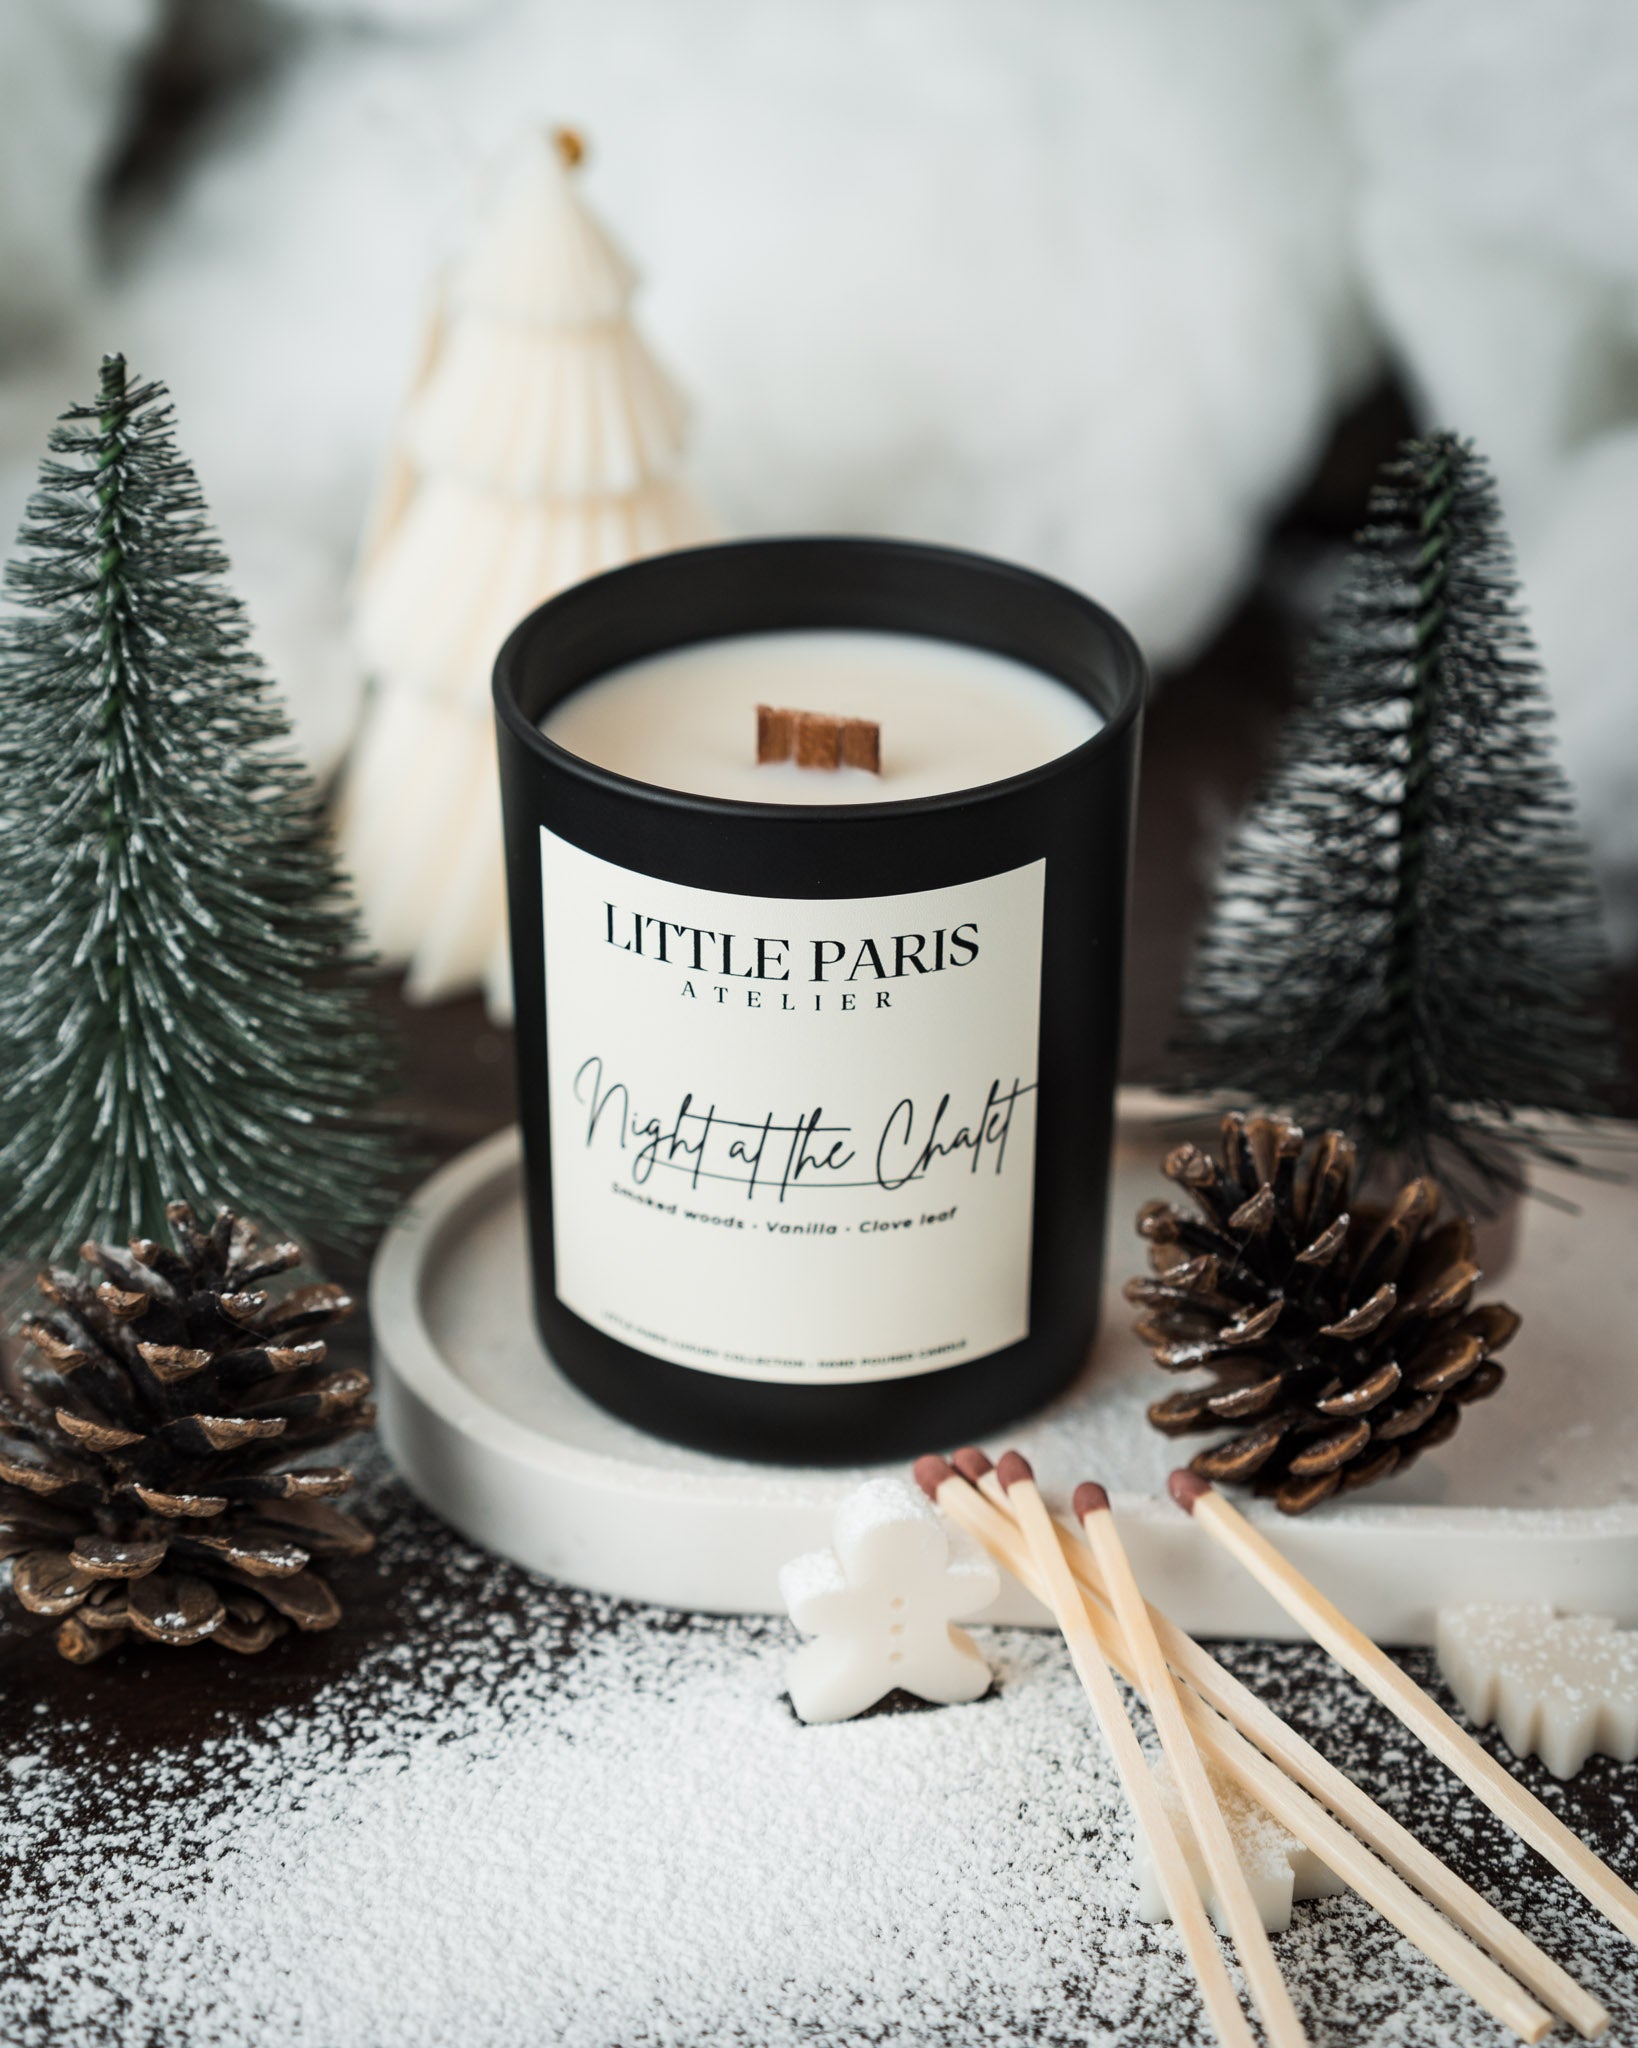 Night at the chalet - Smoked woods • Vanilla • Clove leaf - Little Paris Atelier